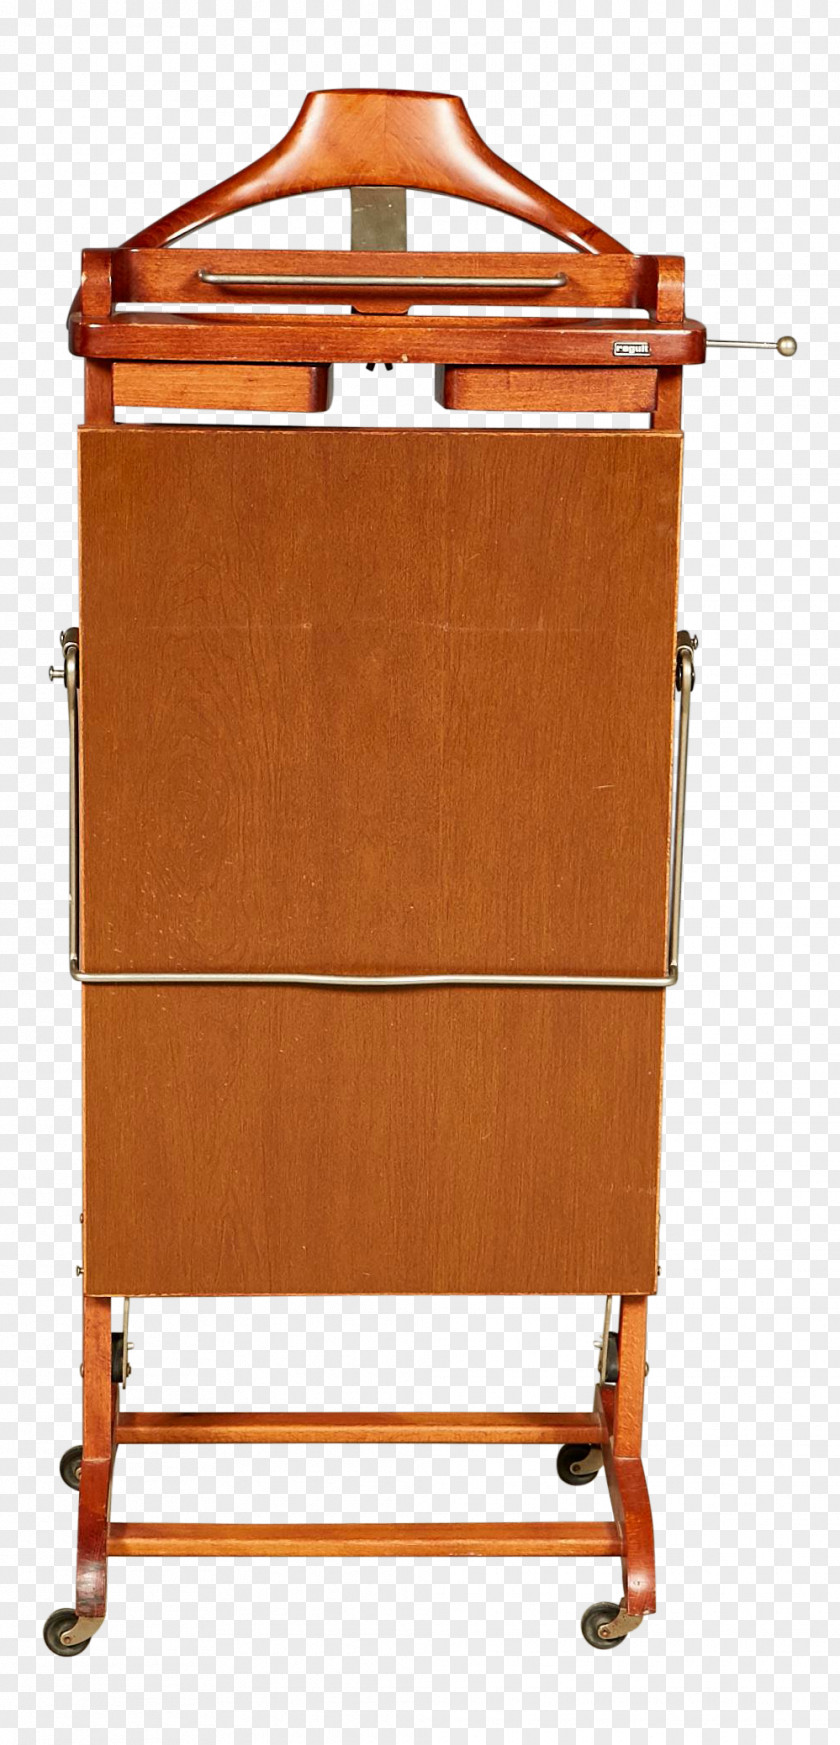 Chair Trouser Press Furniture Clothes Valets Pants PNG